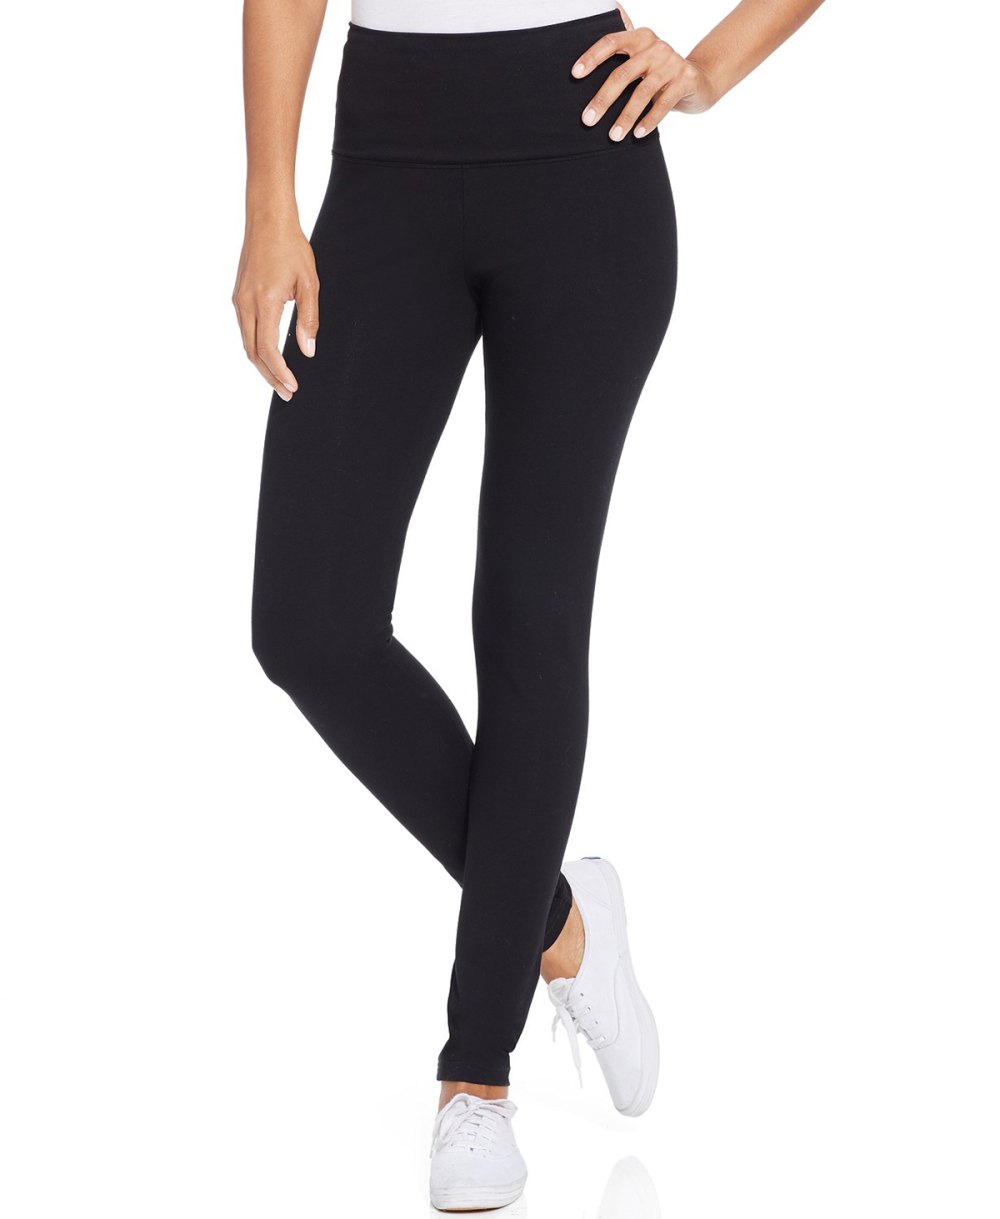 These $22 Leggings Have So Many 5-Star Reviews! | Us Weekly